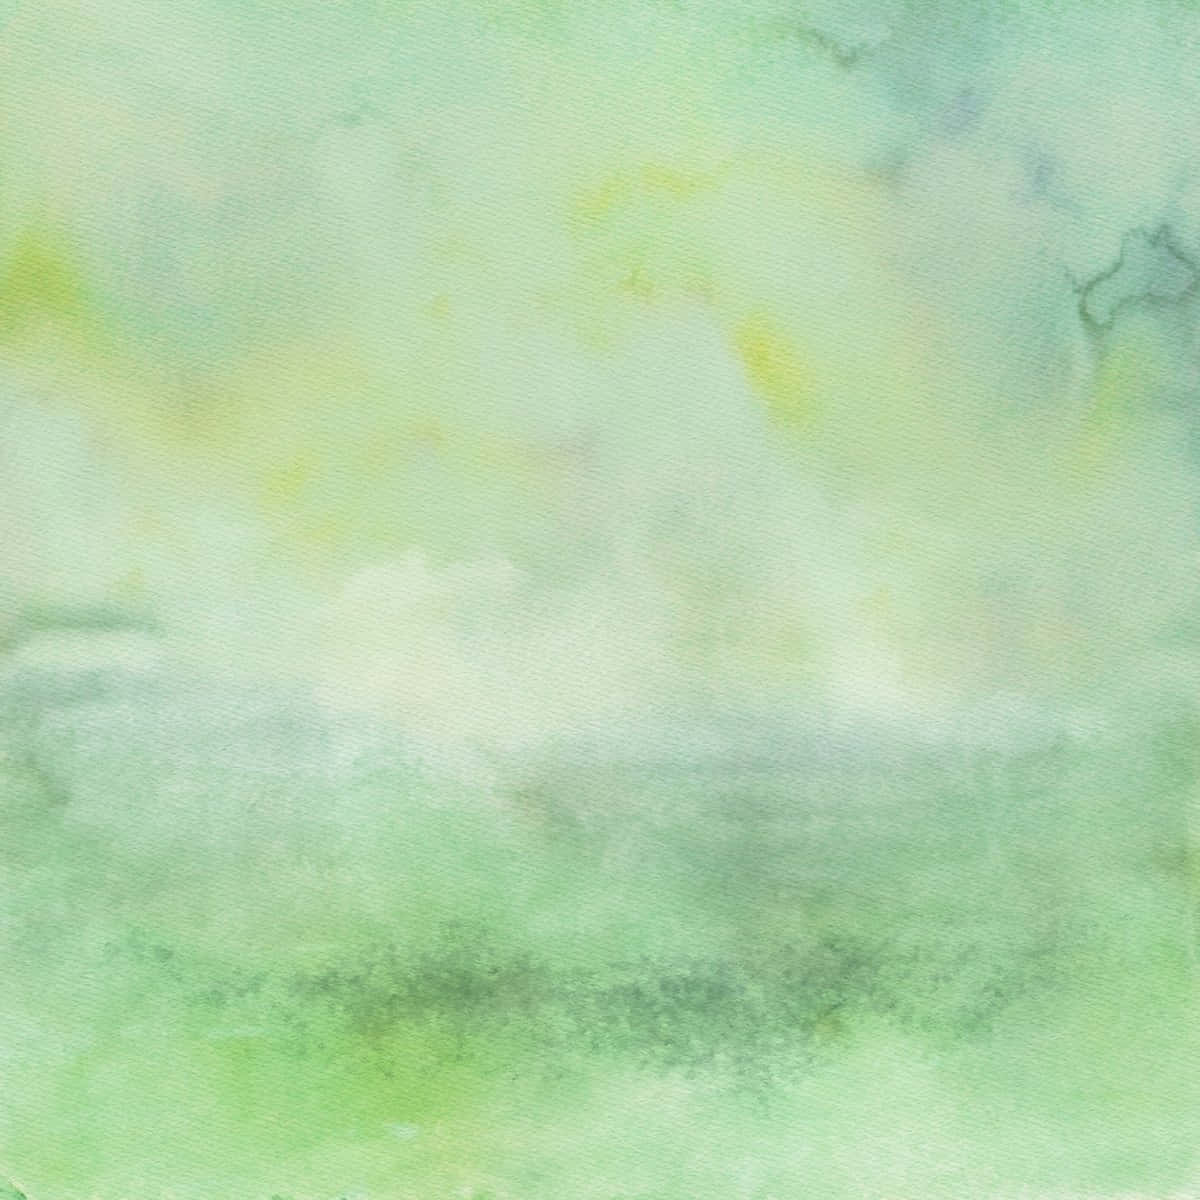 Lively Blue and Green Watercolor Texture